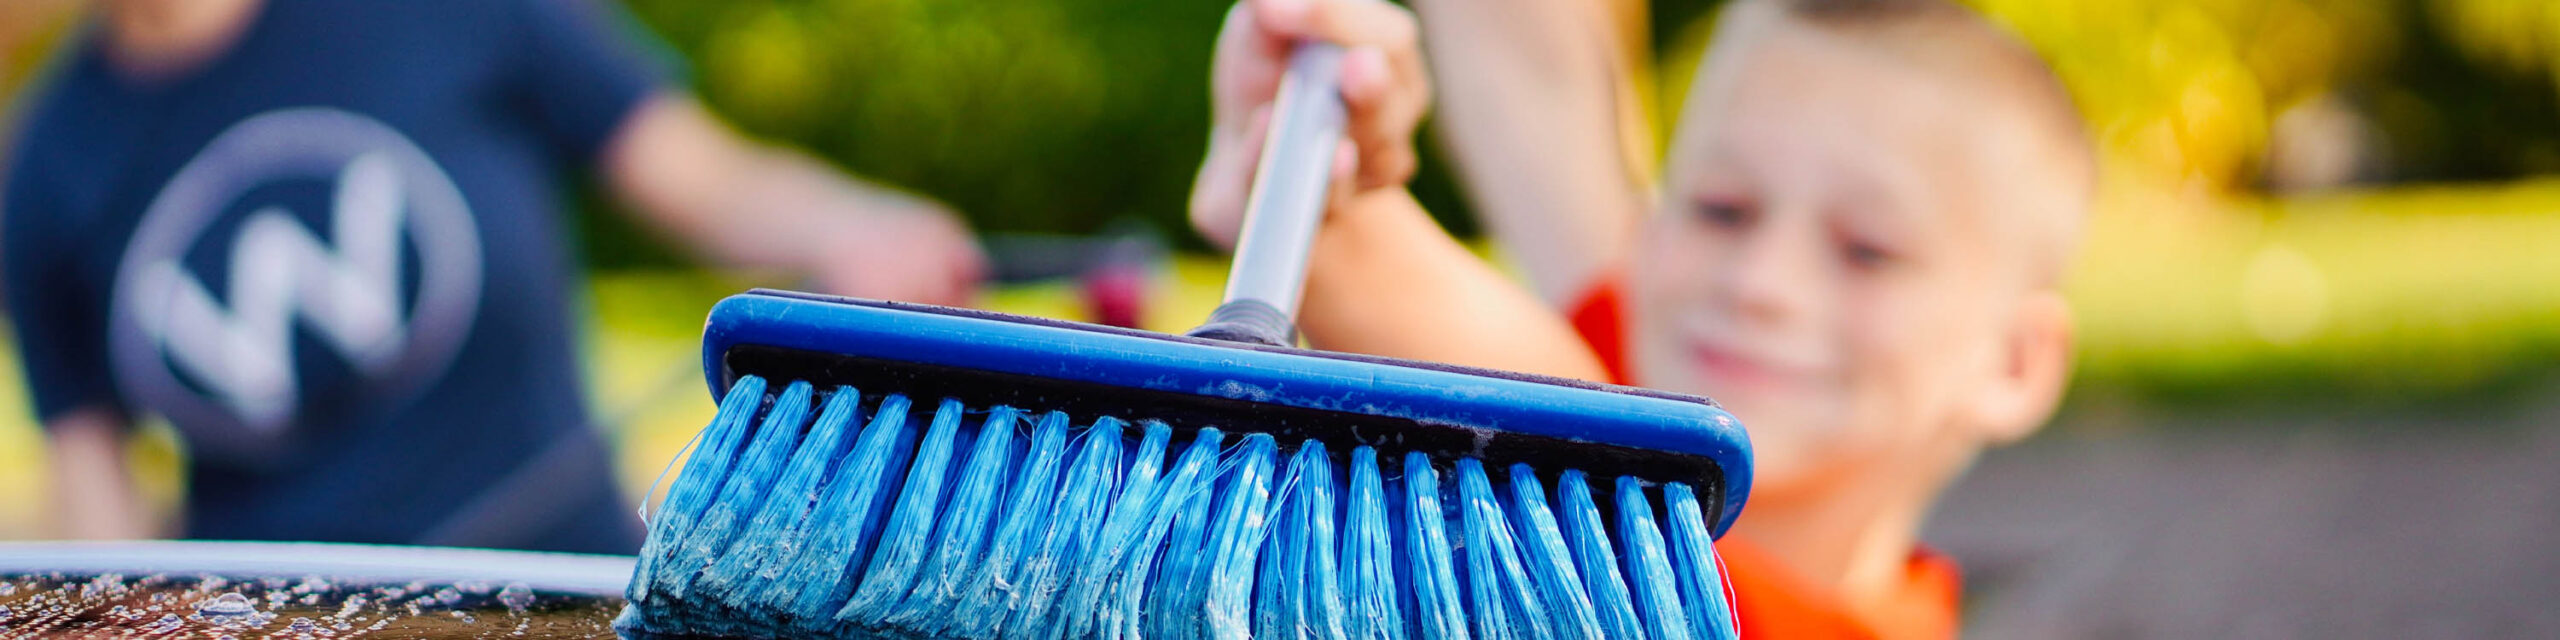 Spring cleaning? Here are some TikTok home cleaning hacks - Dublin's FM104